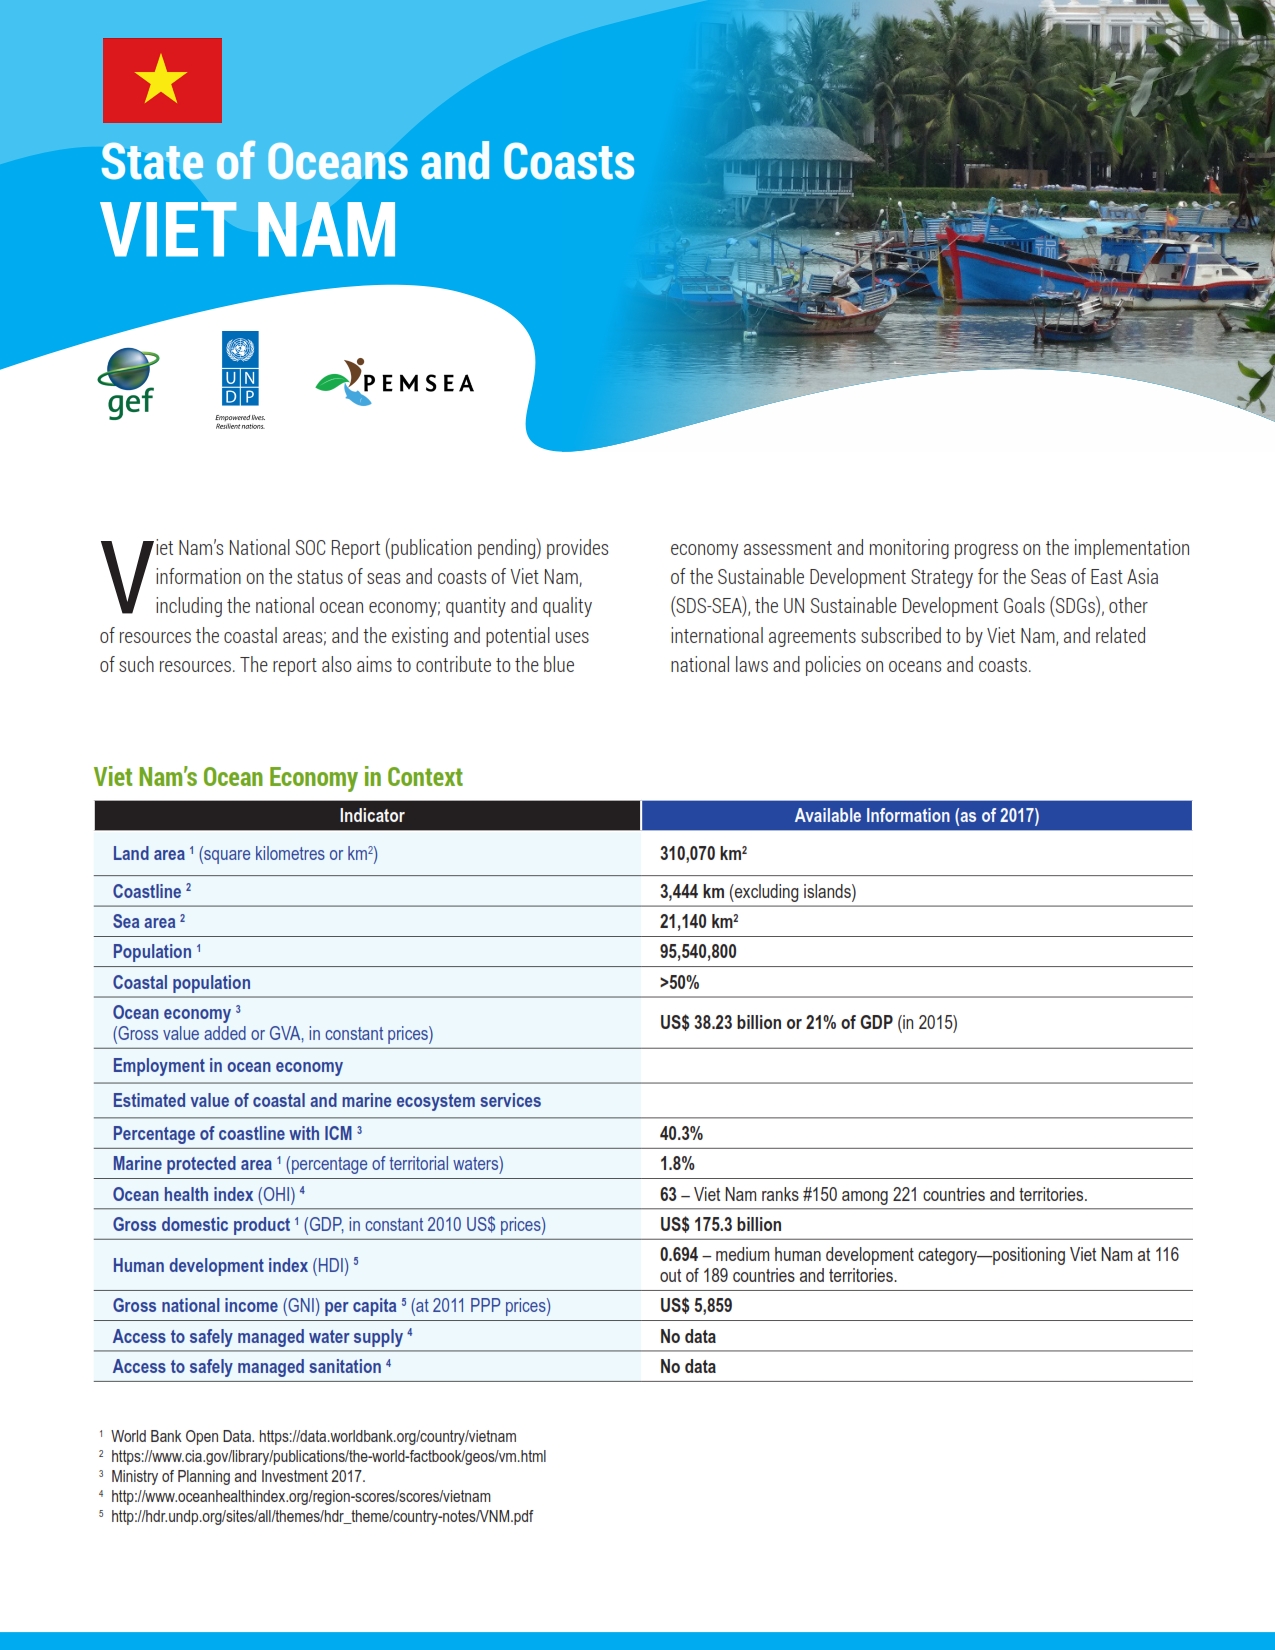 State of Oceans and Coasts of Viet Nam